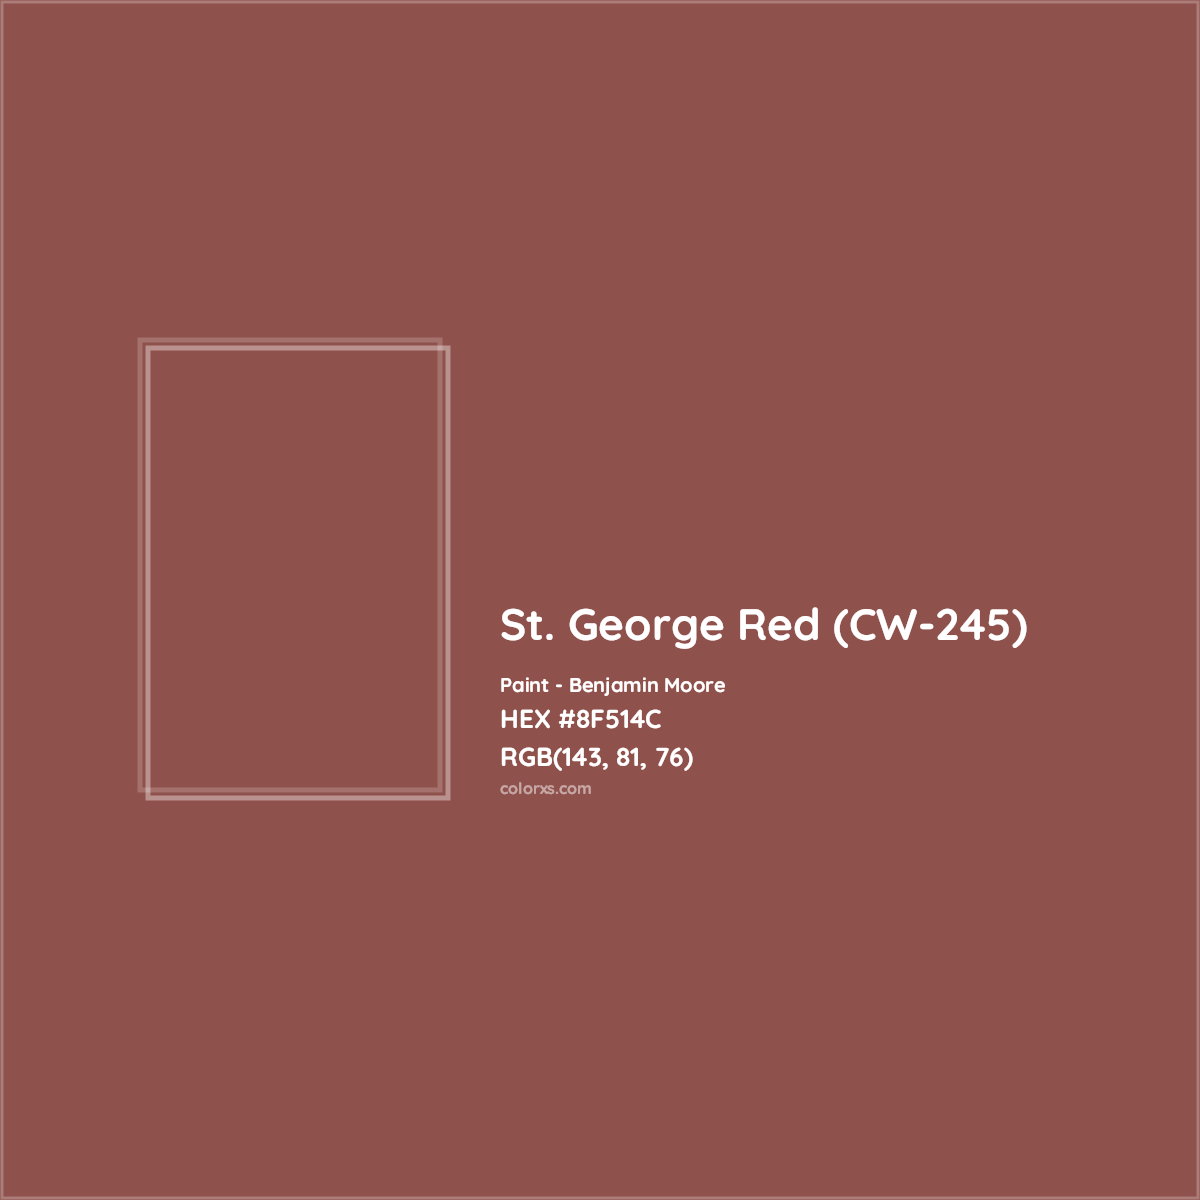 HEX #8F514C St. George Red (CW-245) Paint Benjamin Moore - Color Code